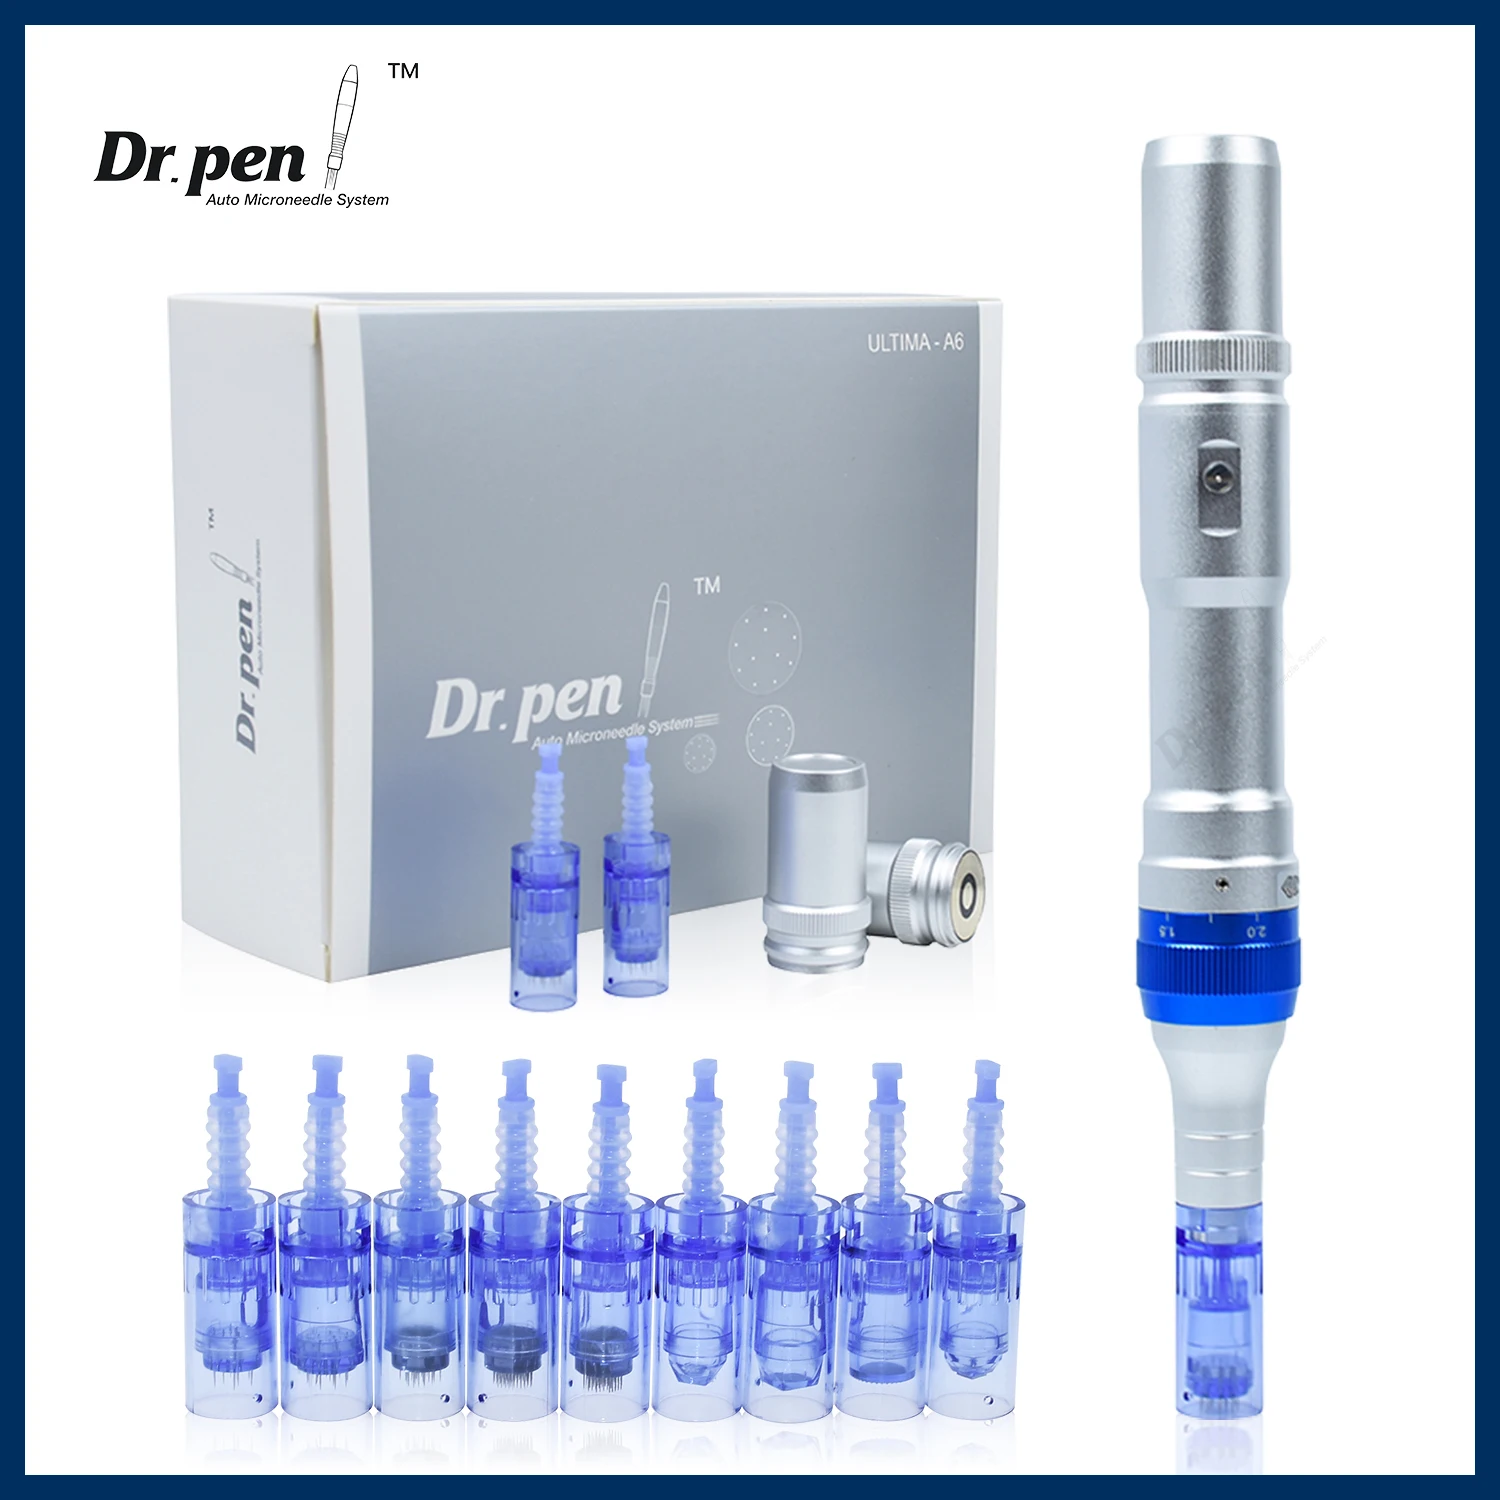 Dr Pen Ultima A6 Kit with 12 Pcs Needle Cartridges Professional Microneedling Derma Pen Home Beauty Device Skin Care Tool